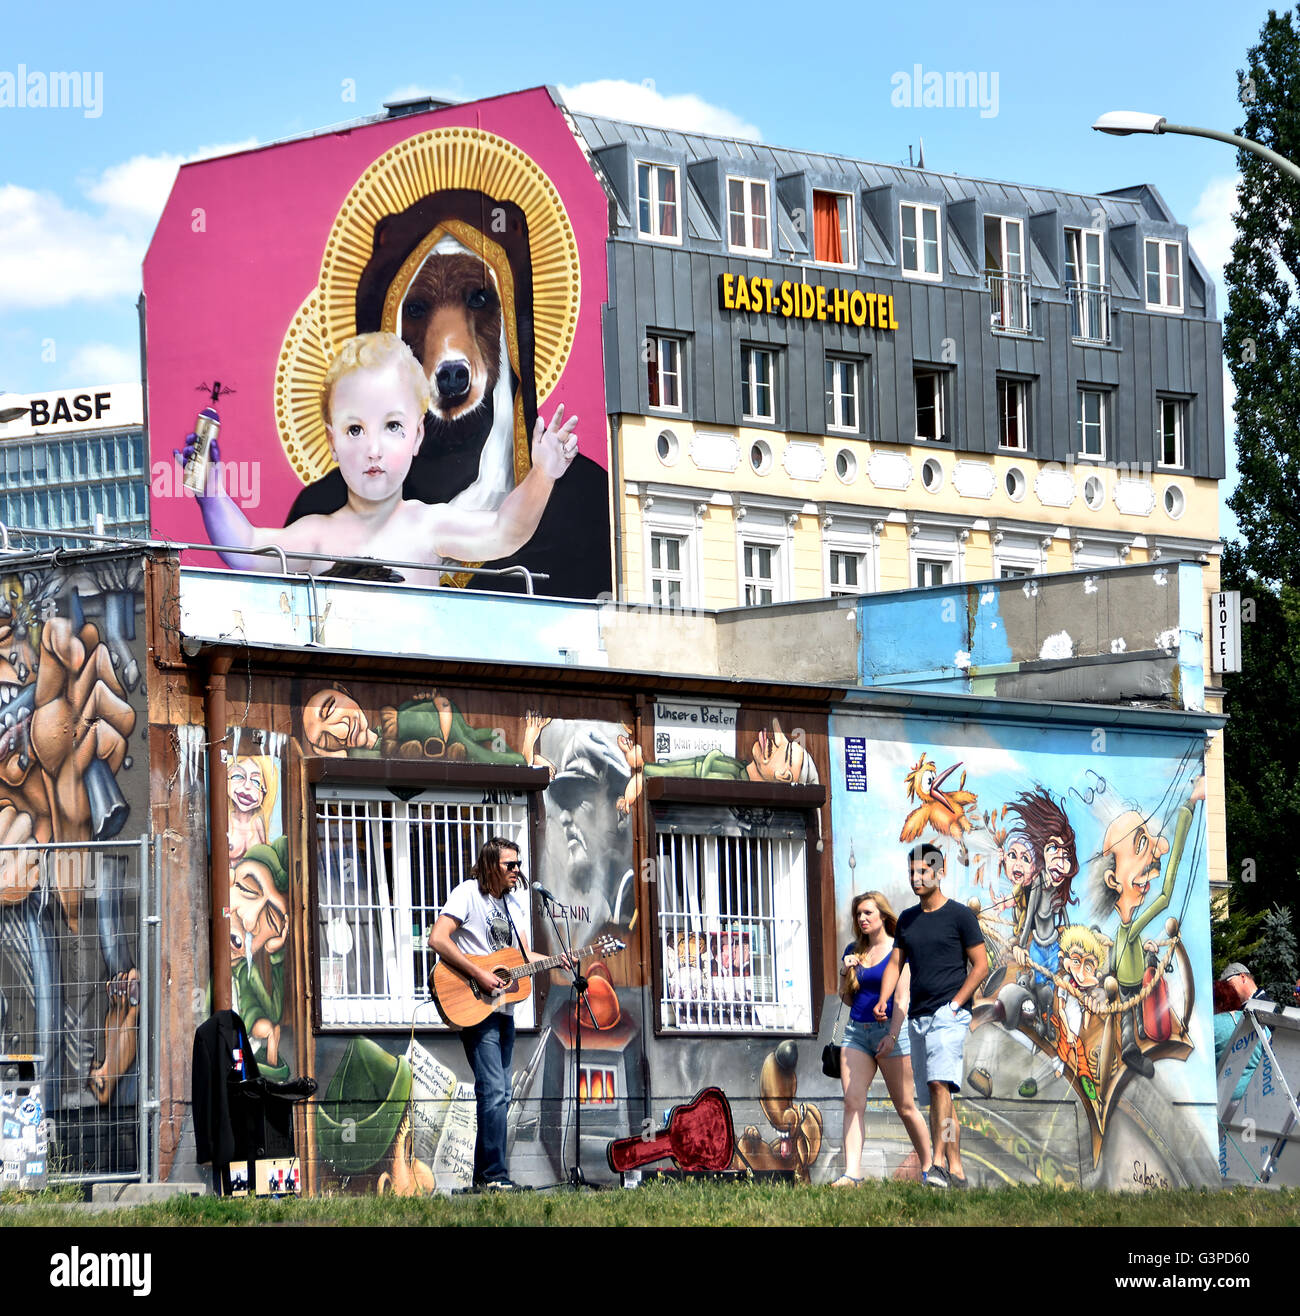 Artist Music East Side Hotel The East Side Gallery's murals graffiti street art on the 1.3km section of the German Berlin Wall by the river Spree and  Muhlenstrasse ) Friedrichshain Spree wall former border Kreuzberg Germany Stock Photo